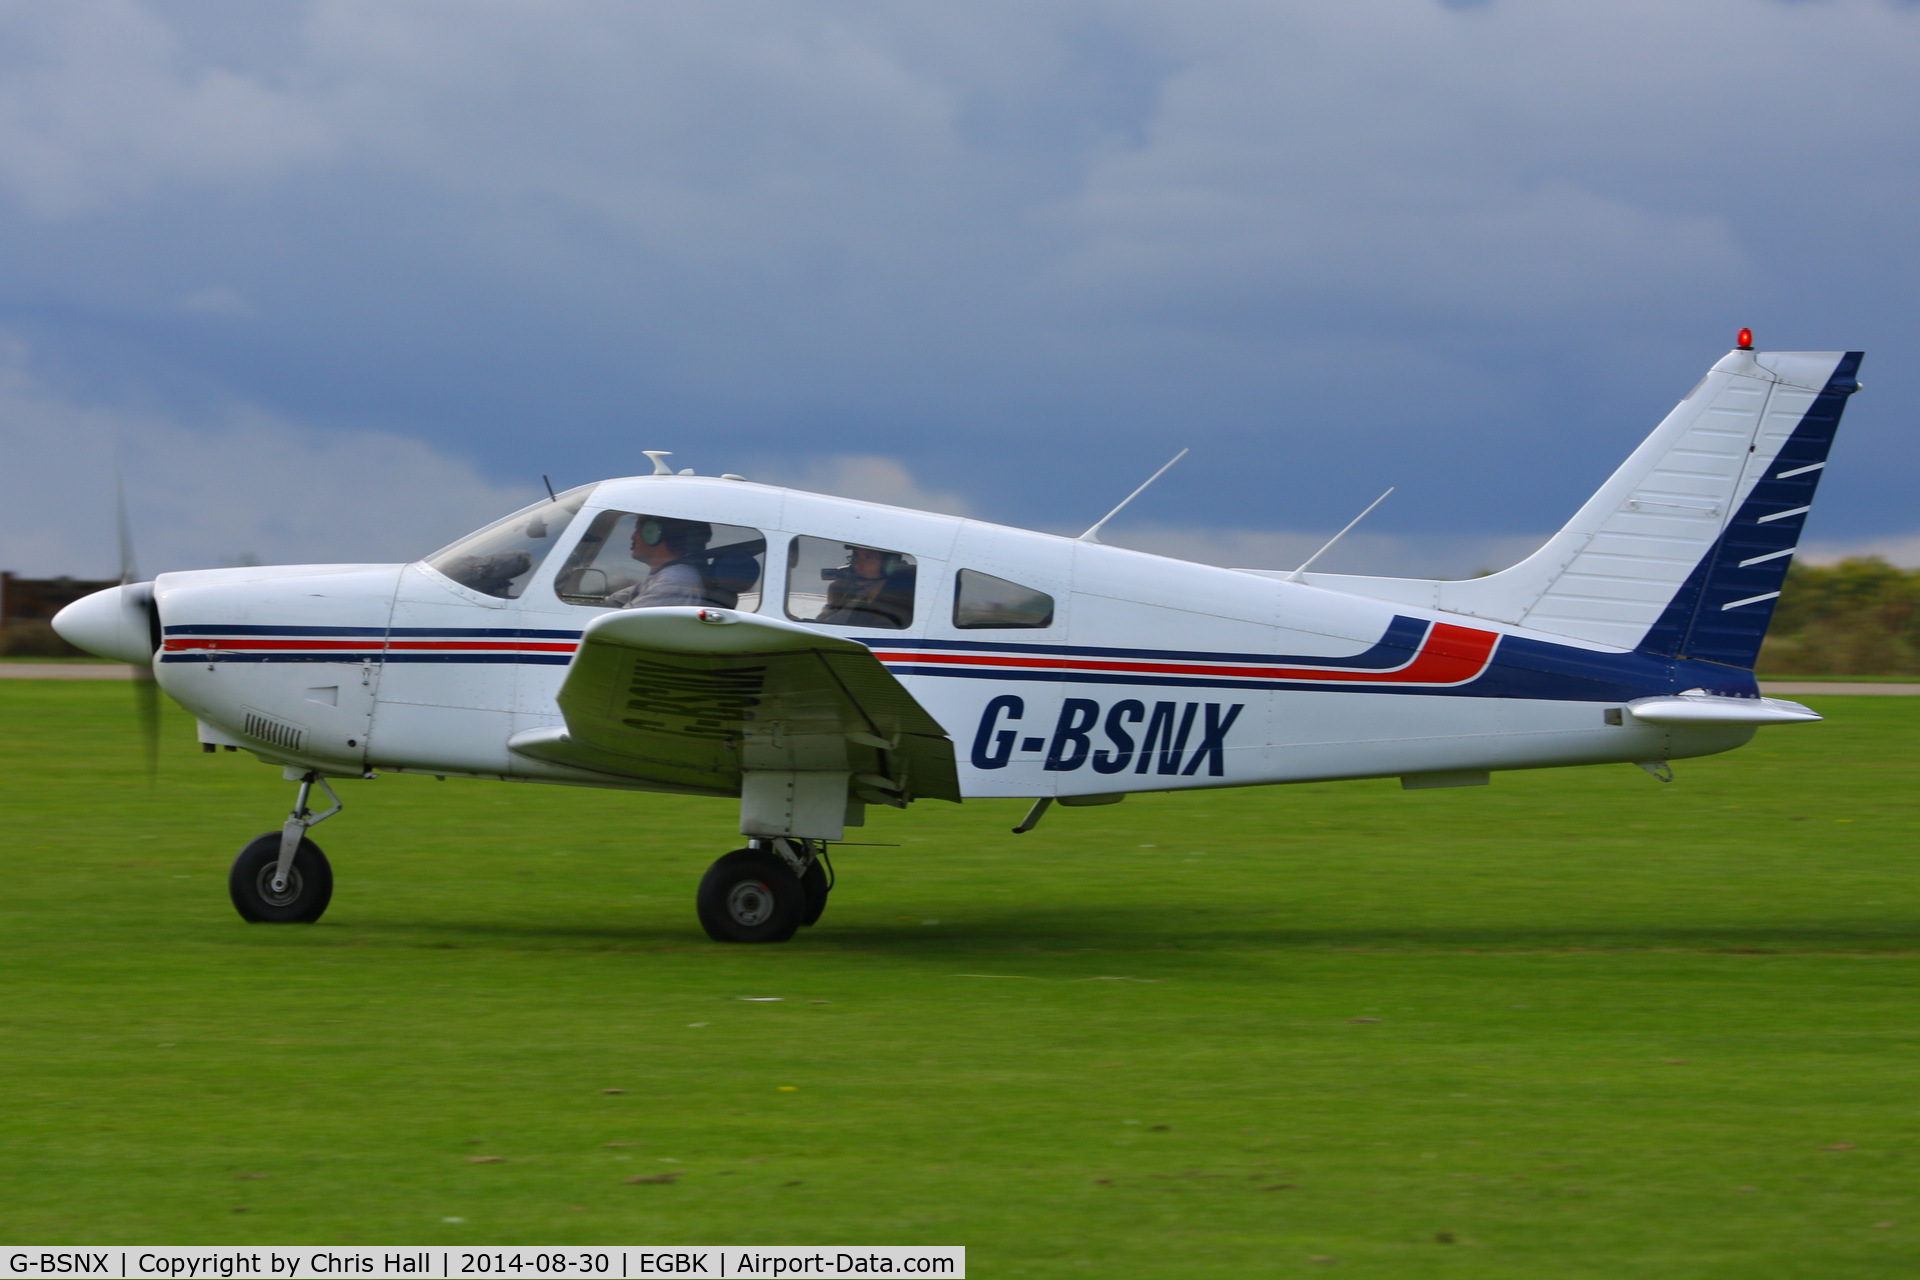 G-BSNX, 1979 Piper PA-28-181 Cherokee Archer II C/N 28-7990311, at the LAA Rally 2014, Sywell